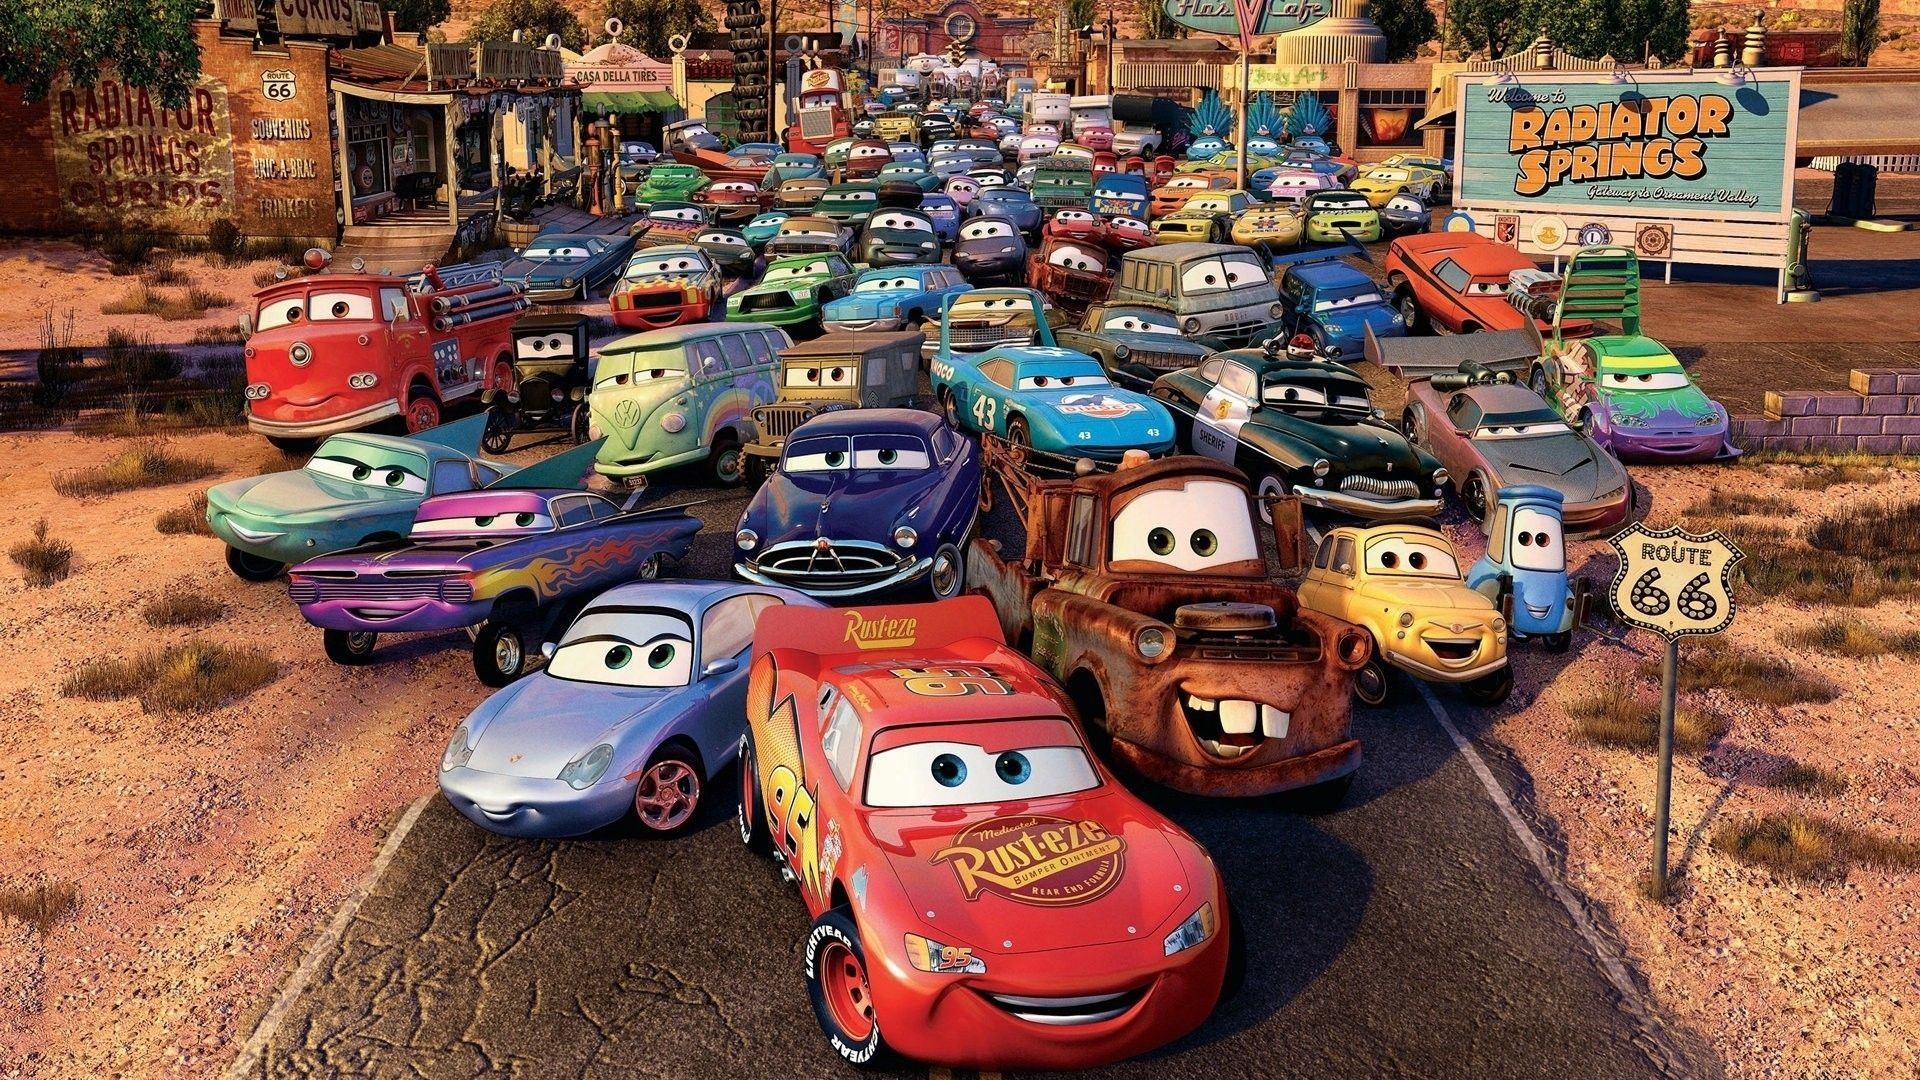 Free download Cars movie Radiator Springs WallpaperFool [1920x1080] for your Desktop, Mobile & Tablet. Explore Springs Wallpaper. Early Spring Wallpaper, Spring Wallpaper Image, Free Desktop Wallpaper Spring Scenes